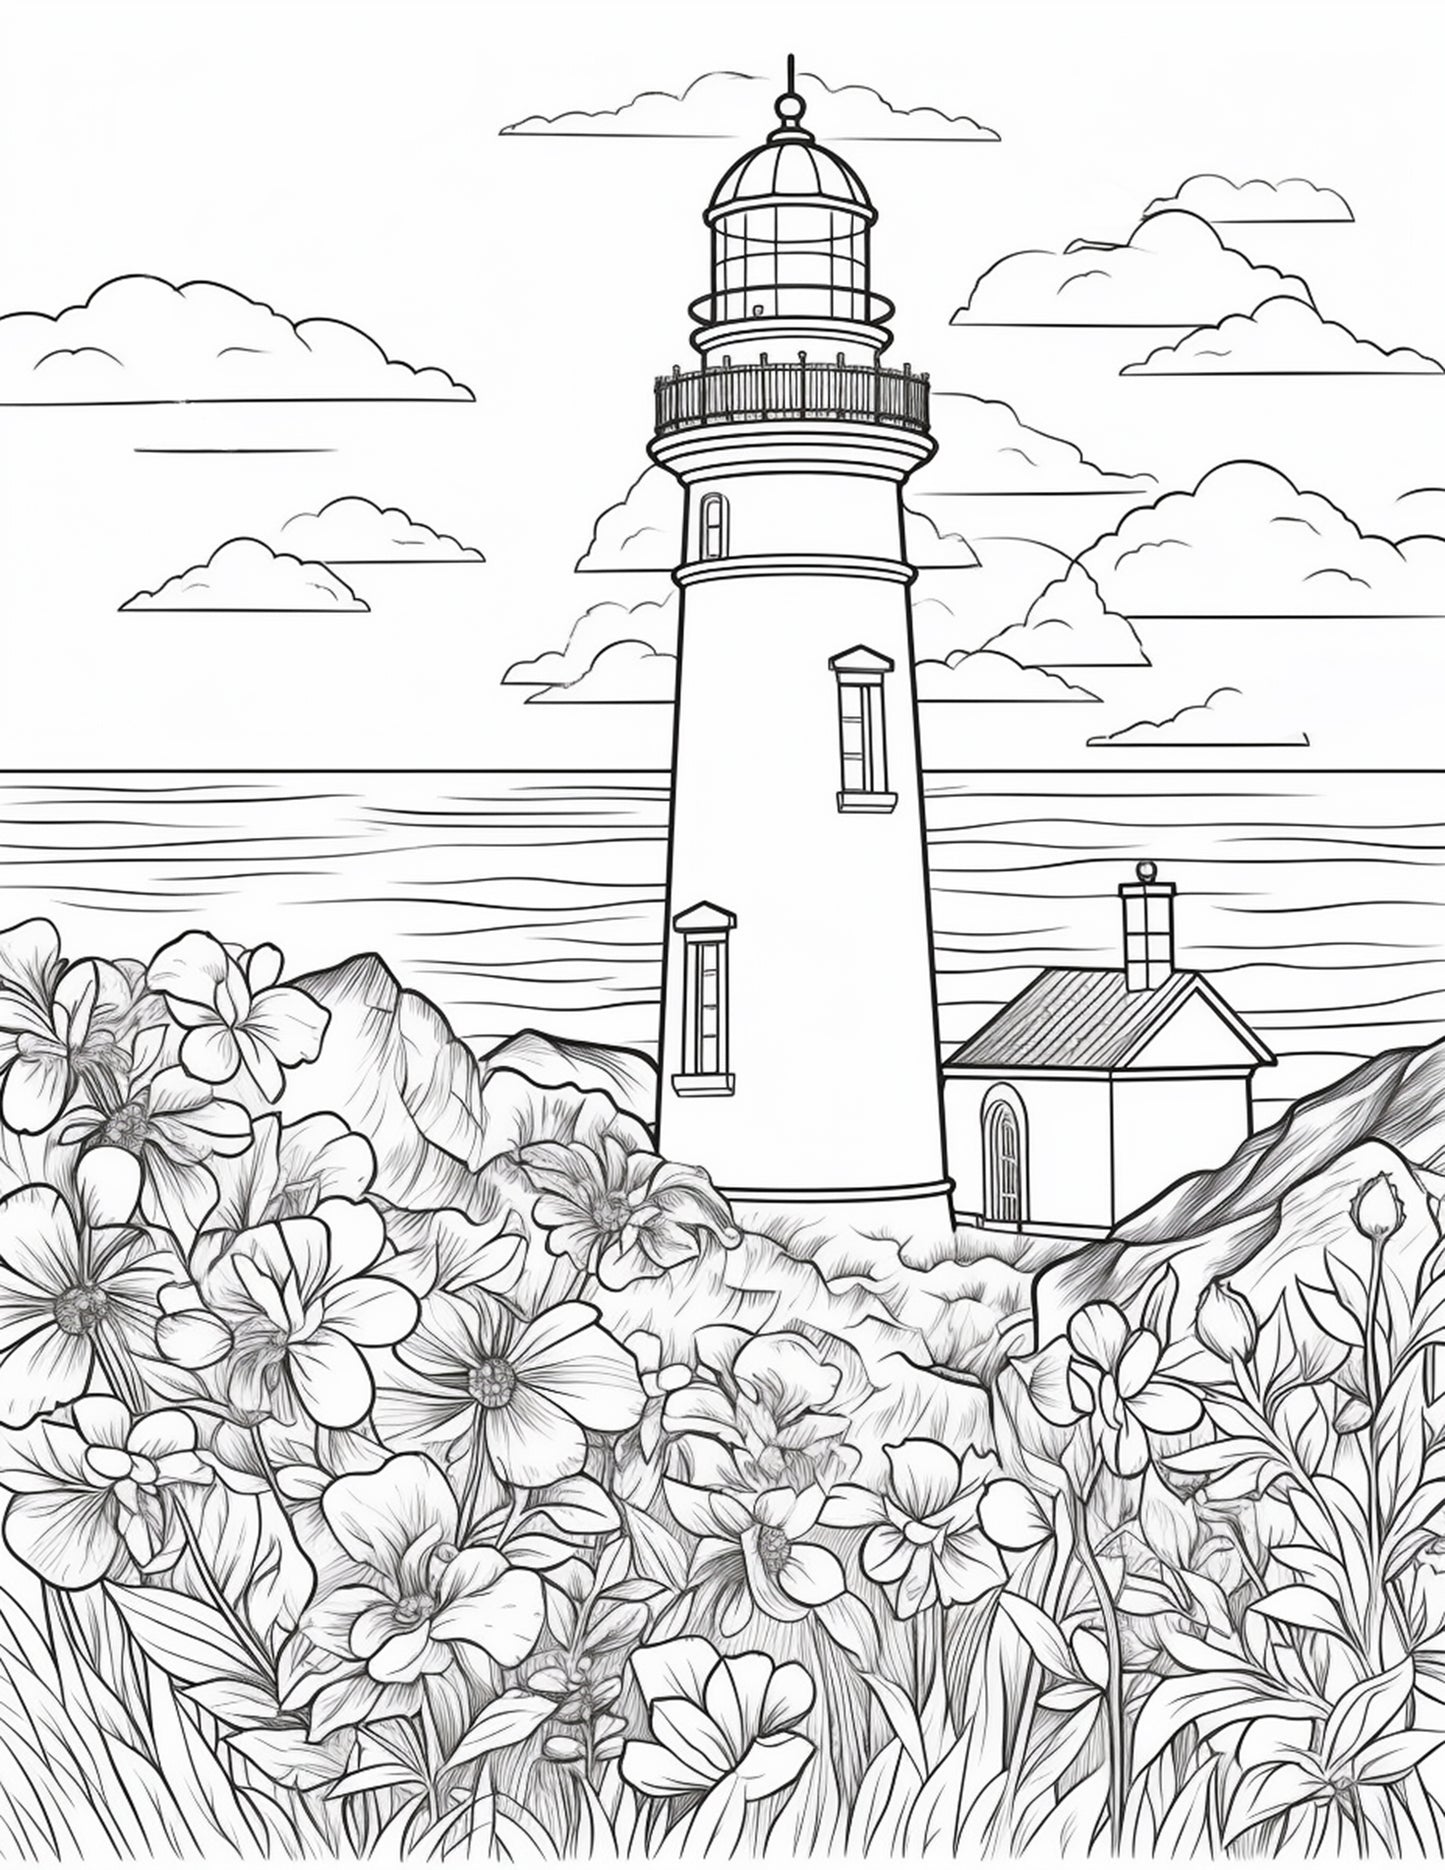 100 Printable Lighthouse Scene Coloring Pages for Adults, Printable PDF File Download